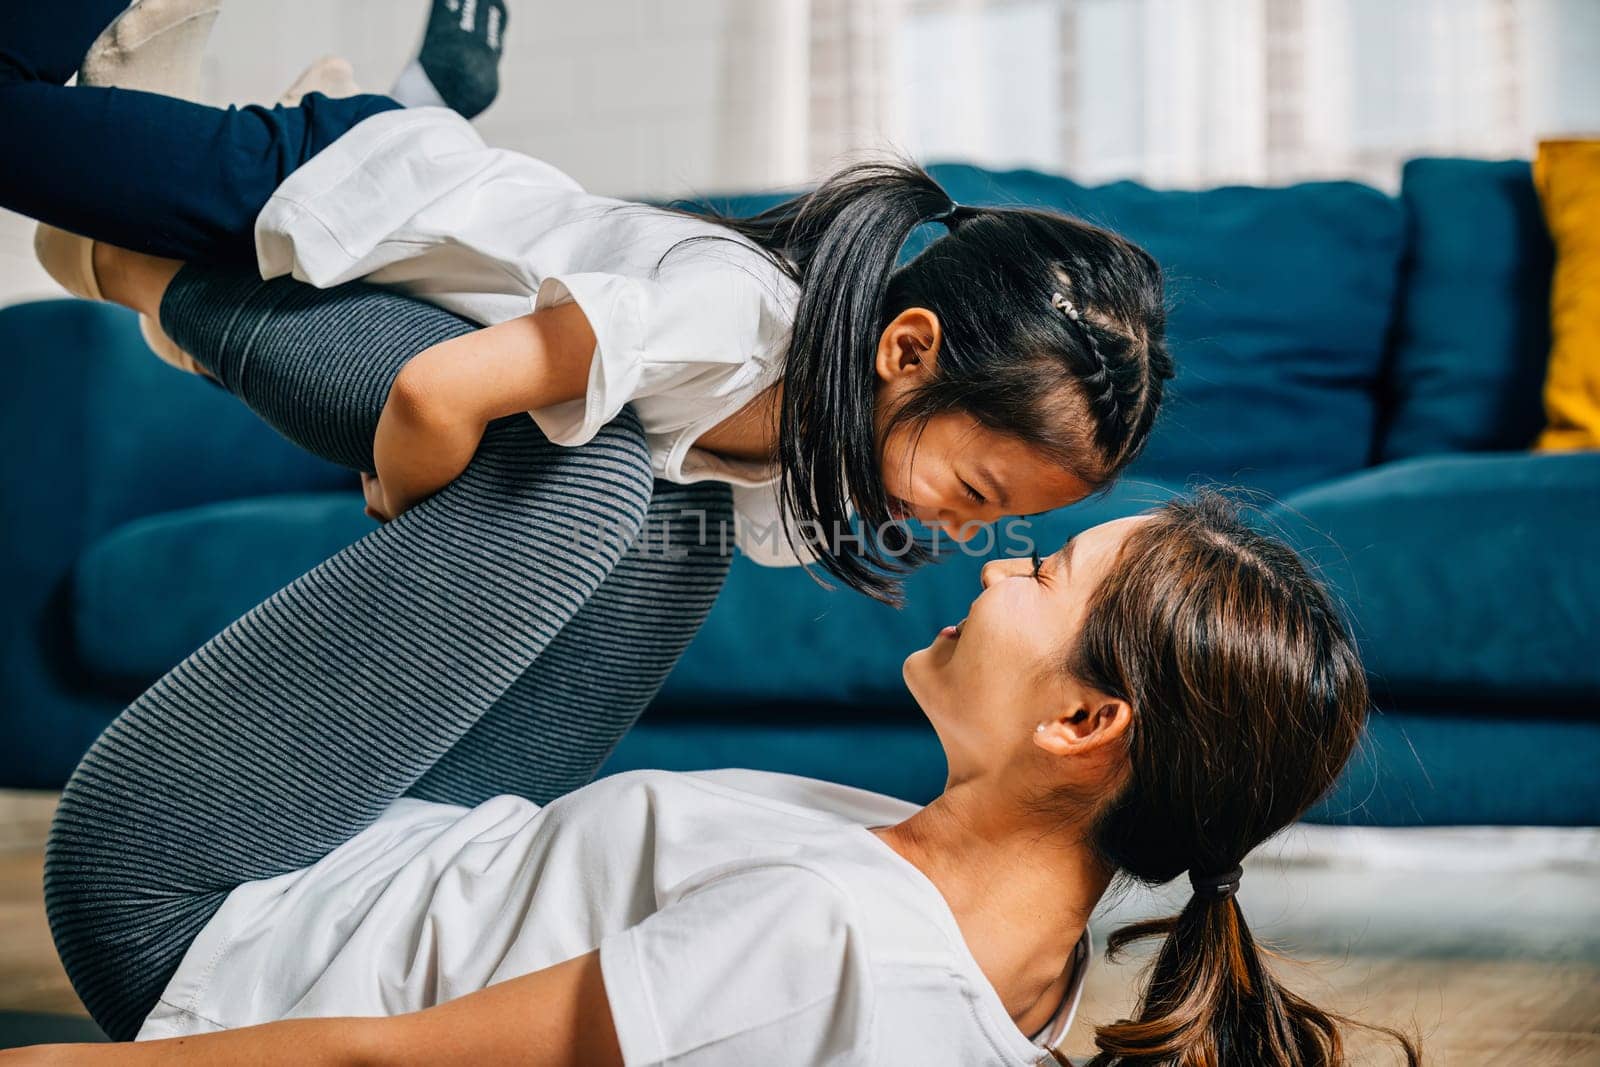 In a cozy setting a mother and her child practice family fitness imaginatively 'flying' like airplanes during their Pilates and yoga routine strengthening their bond and sharing happiness.